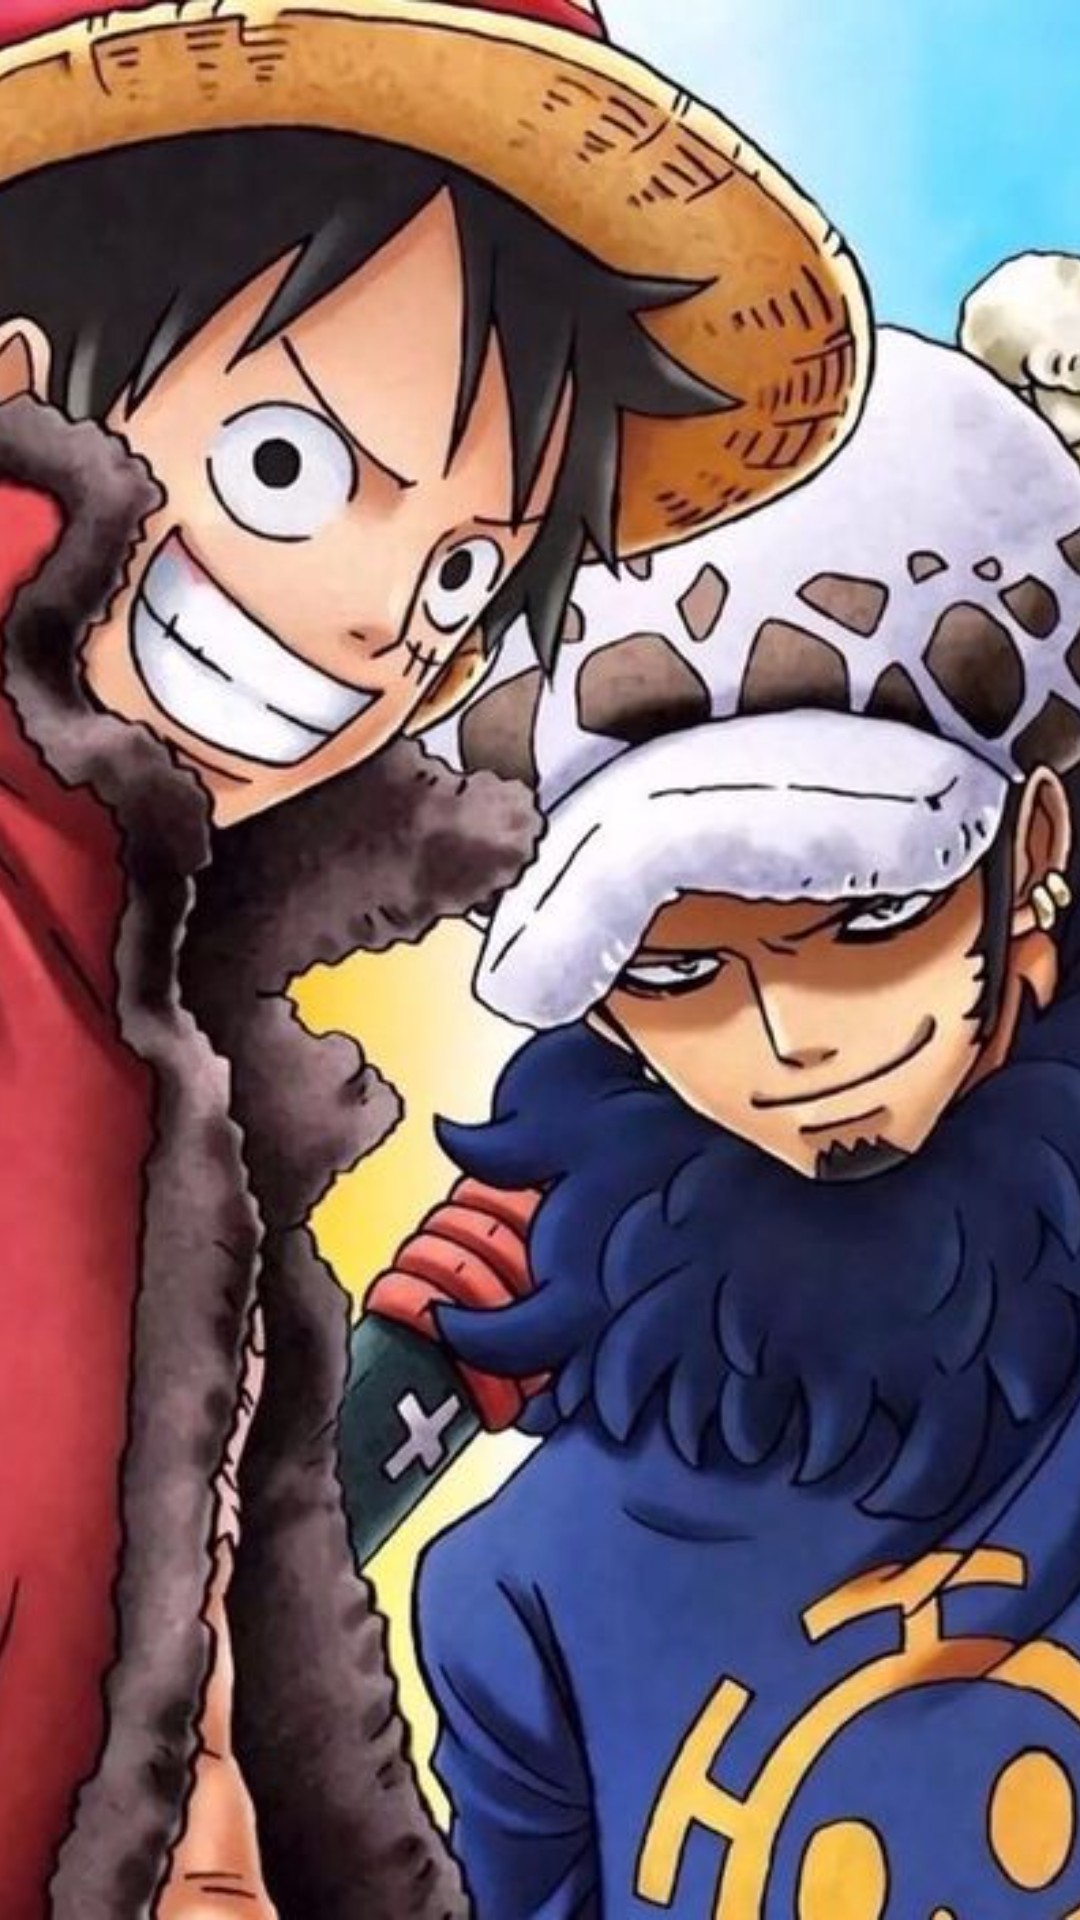 Law and luffy Android Wallpaper